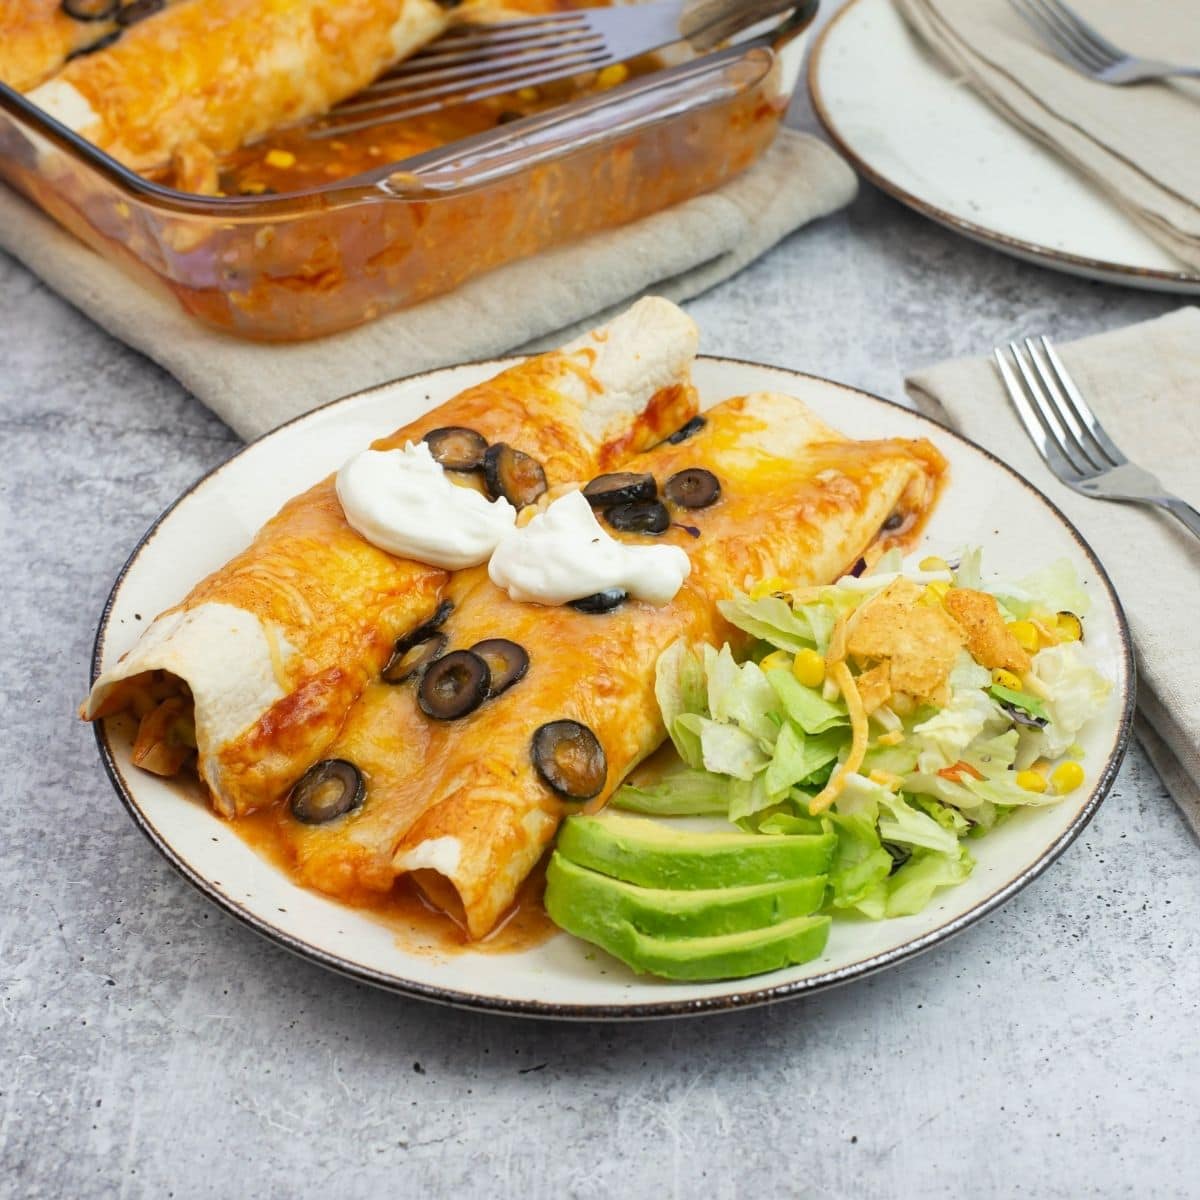 A serving of enchiladas on a plate with a side salad.